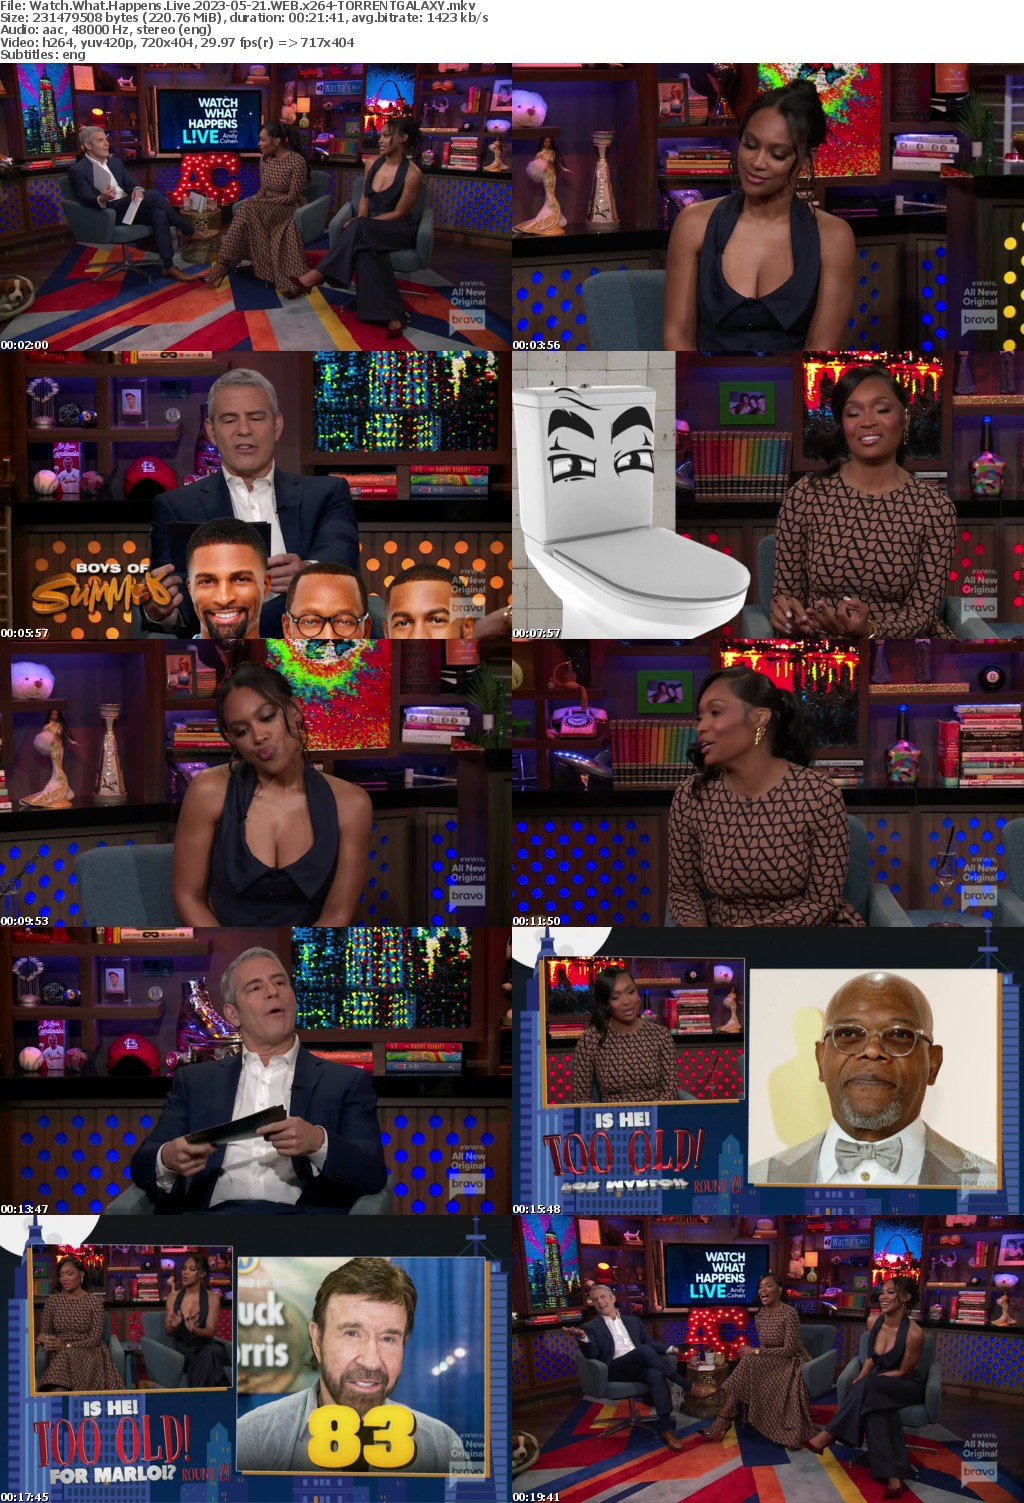 Watch What Happens Live 2023-05-21 WEB x264-GALAXY